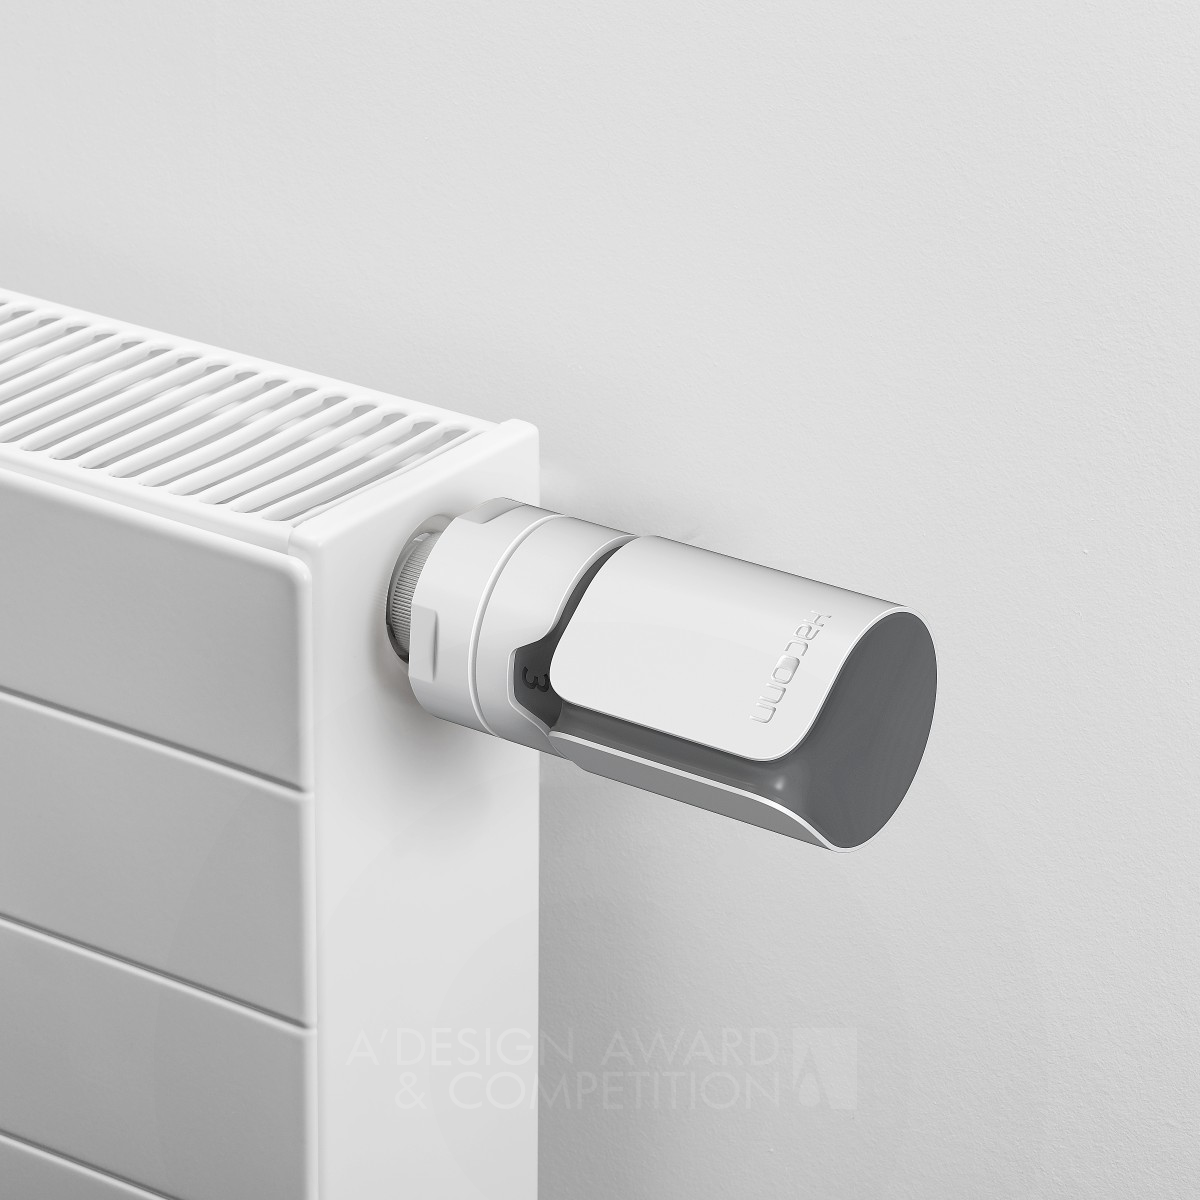 Haconn Radiator Thermostat Automatically Regulates Room Temperature